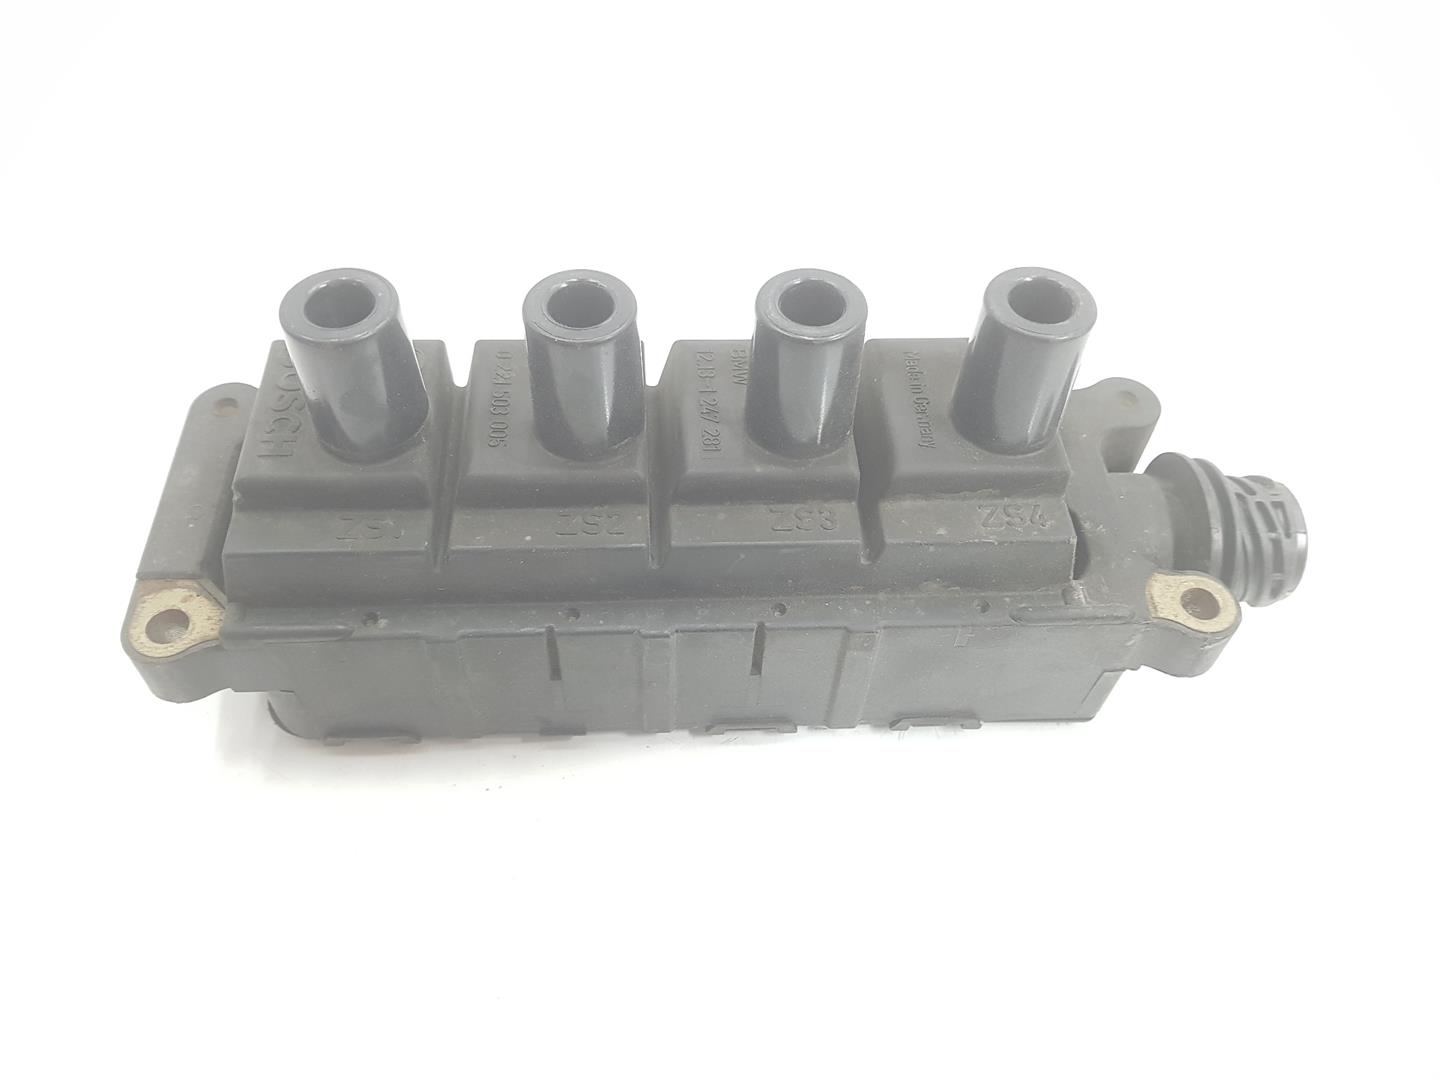 BMW 3 Series E36 (1990-2000) High Voltage Ignition Coil 0221503005, 12131247281, 1141CB 23751724